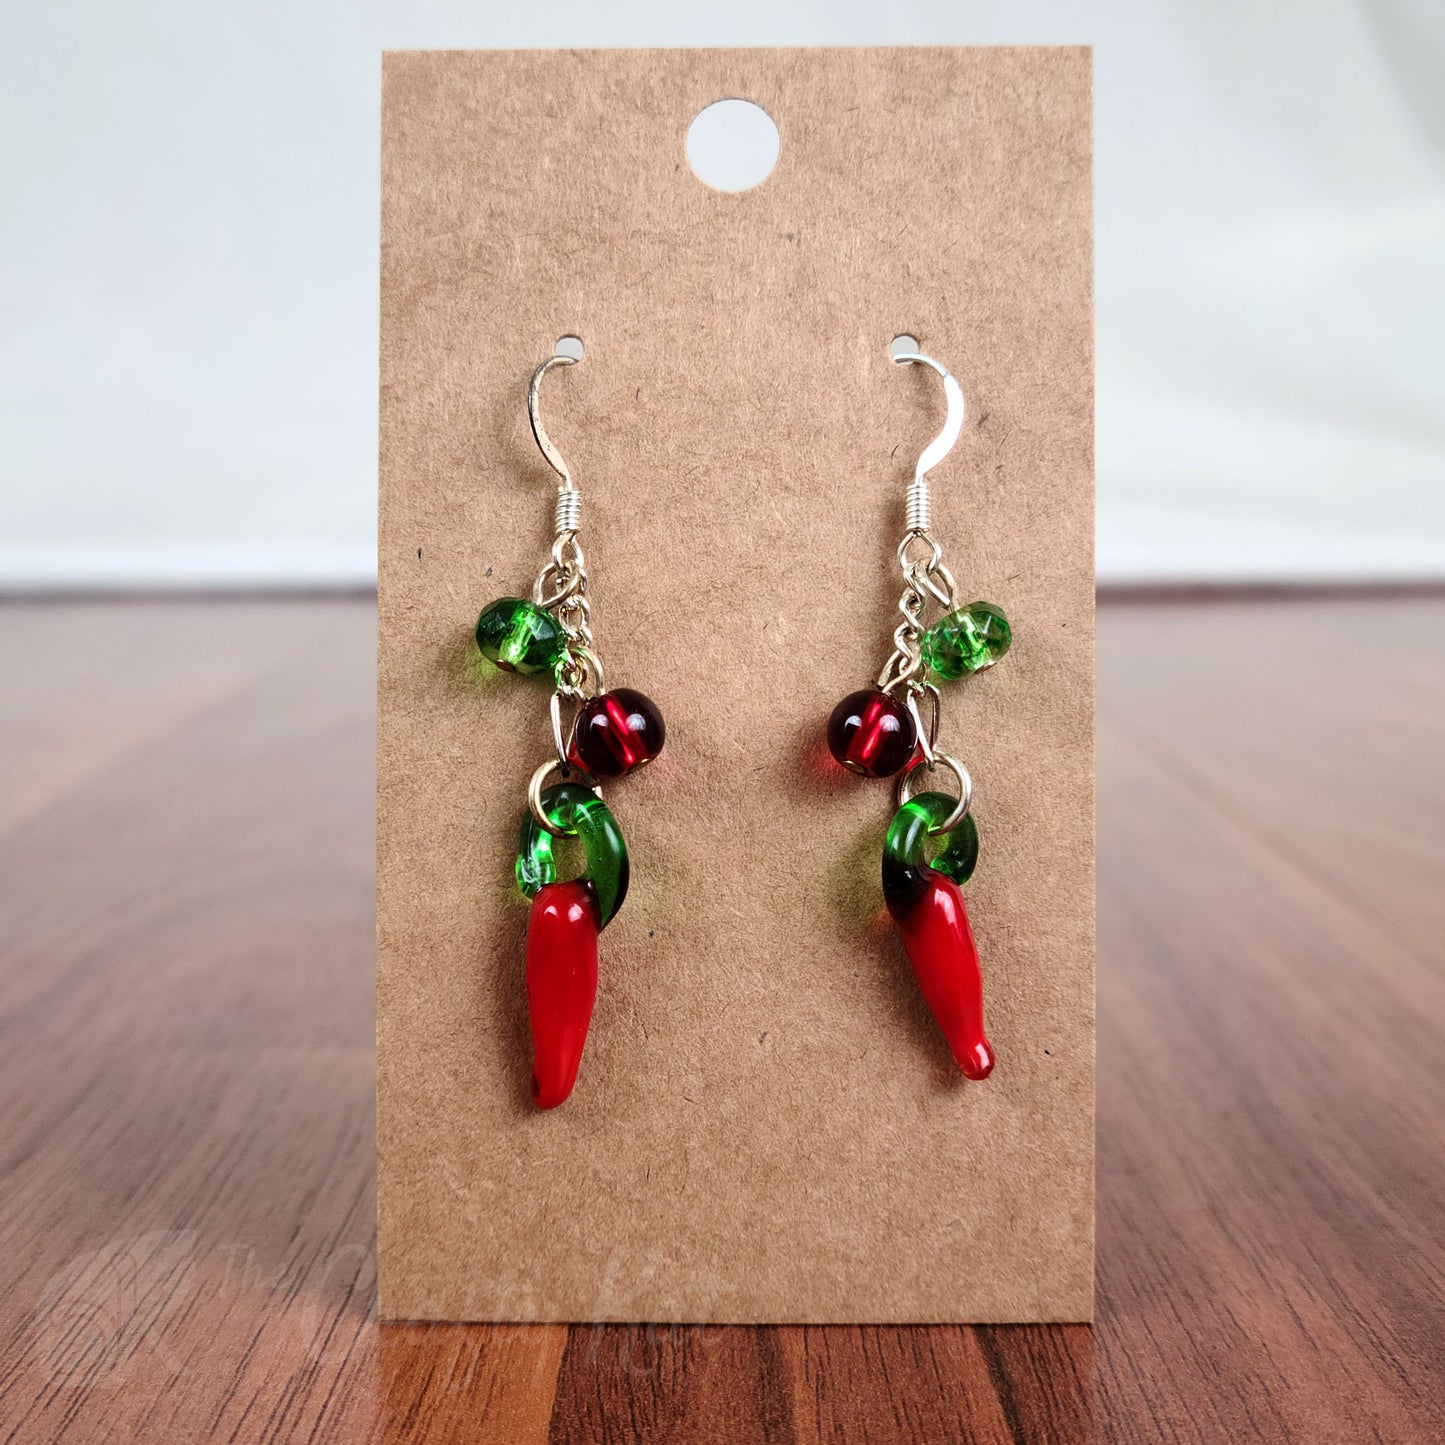 Dangling earrings made of lampwork glass chili peppers, plus green and red pressed glass beads on silver fittings